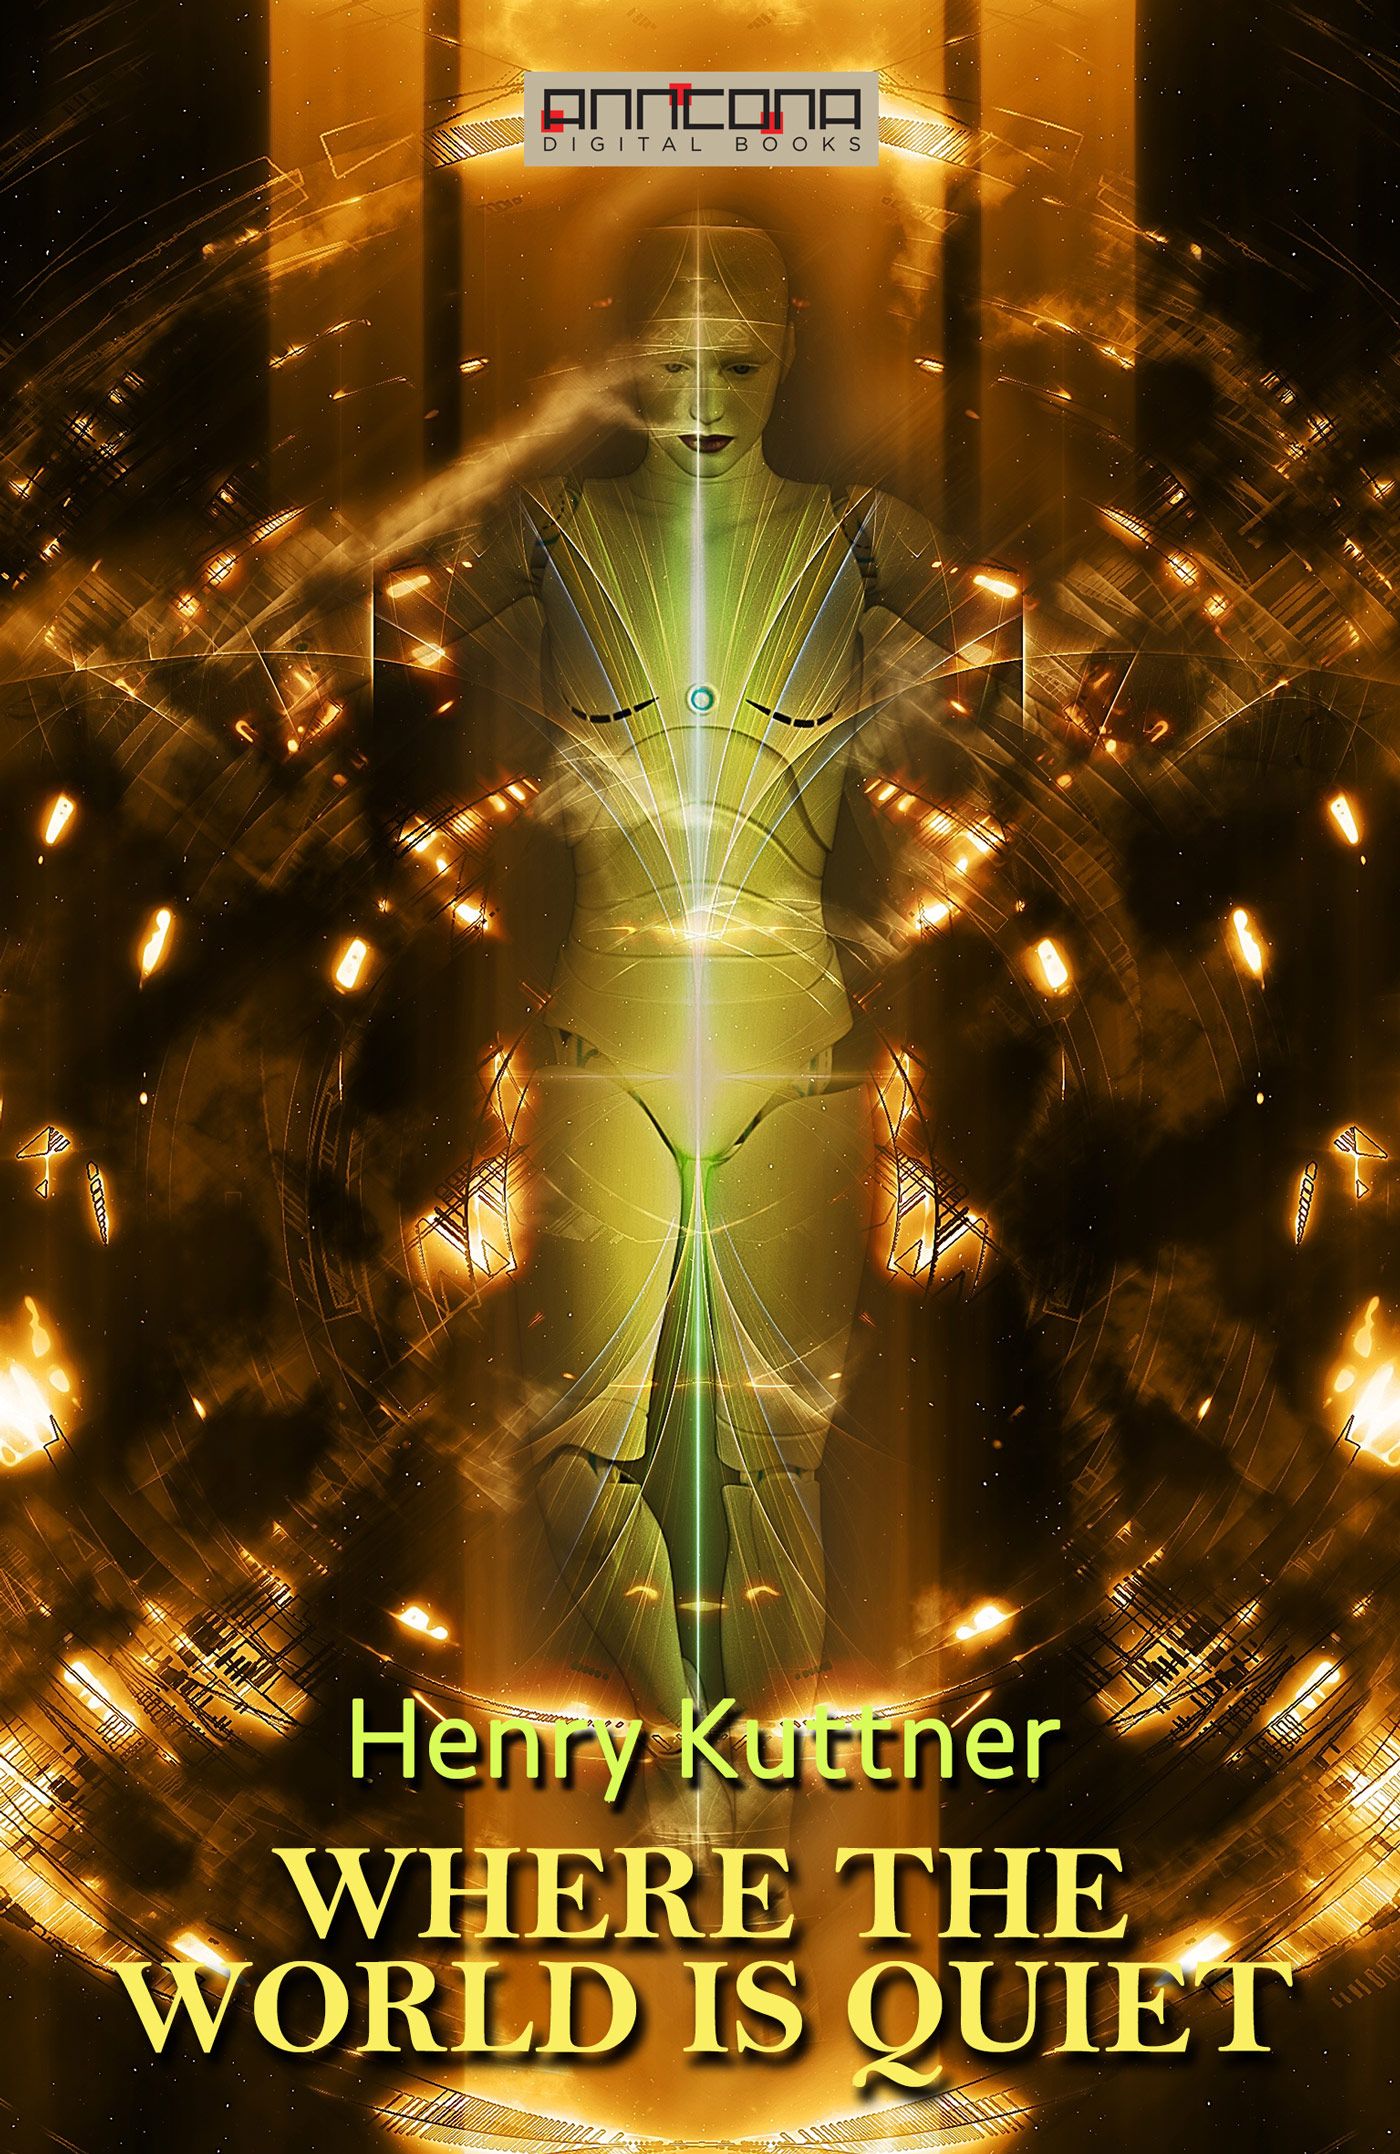 Where the World is Quiet, eBook by Henry Kuttner